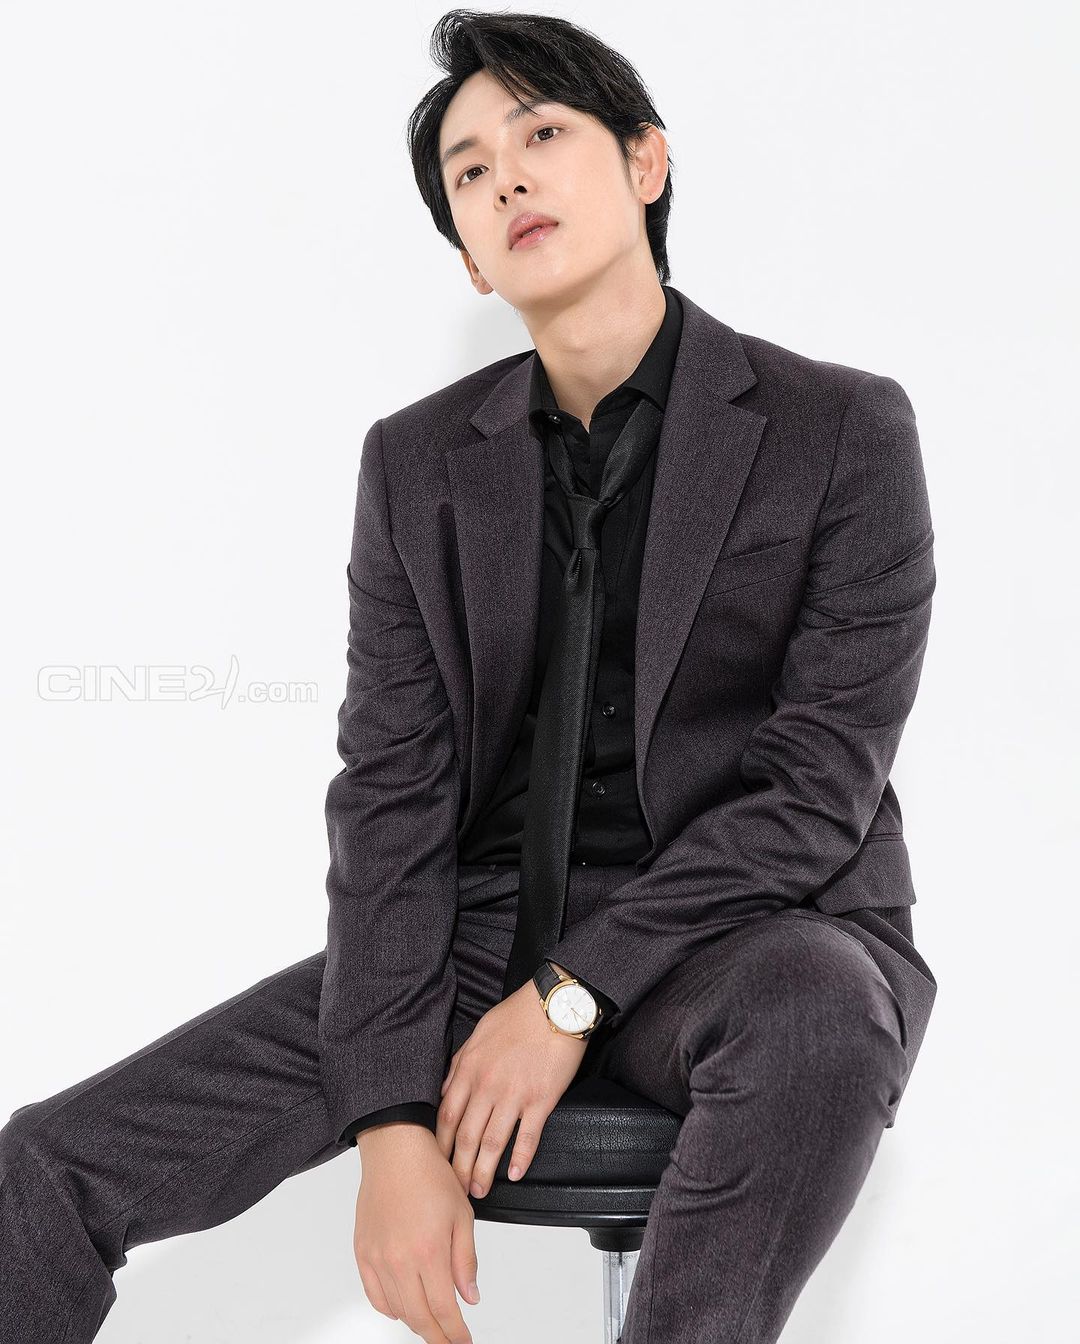 Im Siwan Net Worth 2022: How Much Did the 'Tracer' Actor Earn From His Dramas?